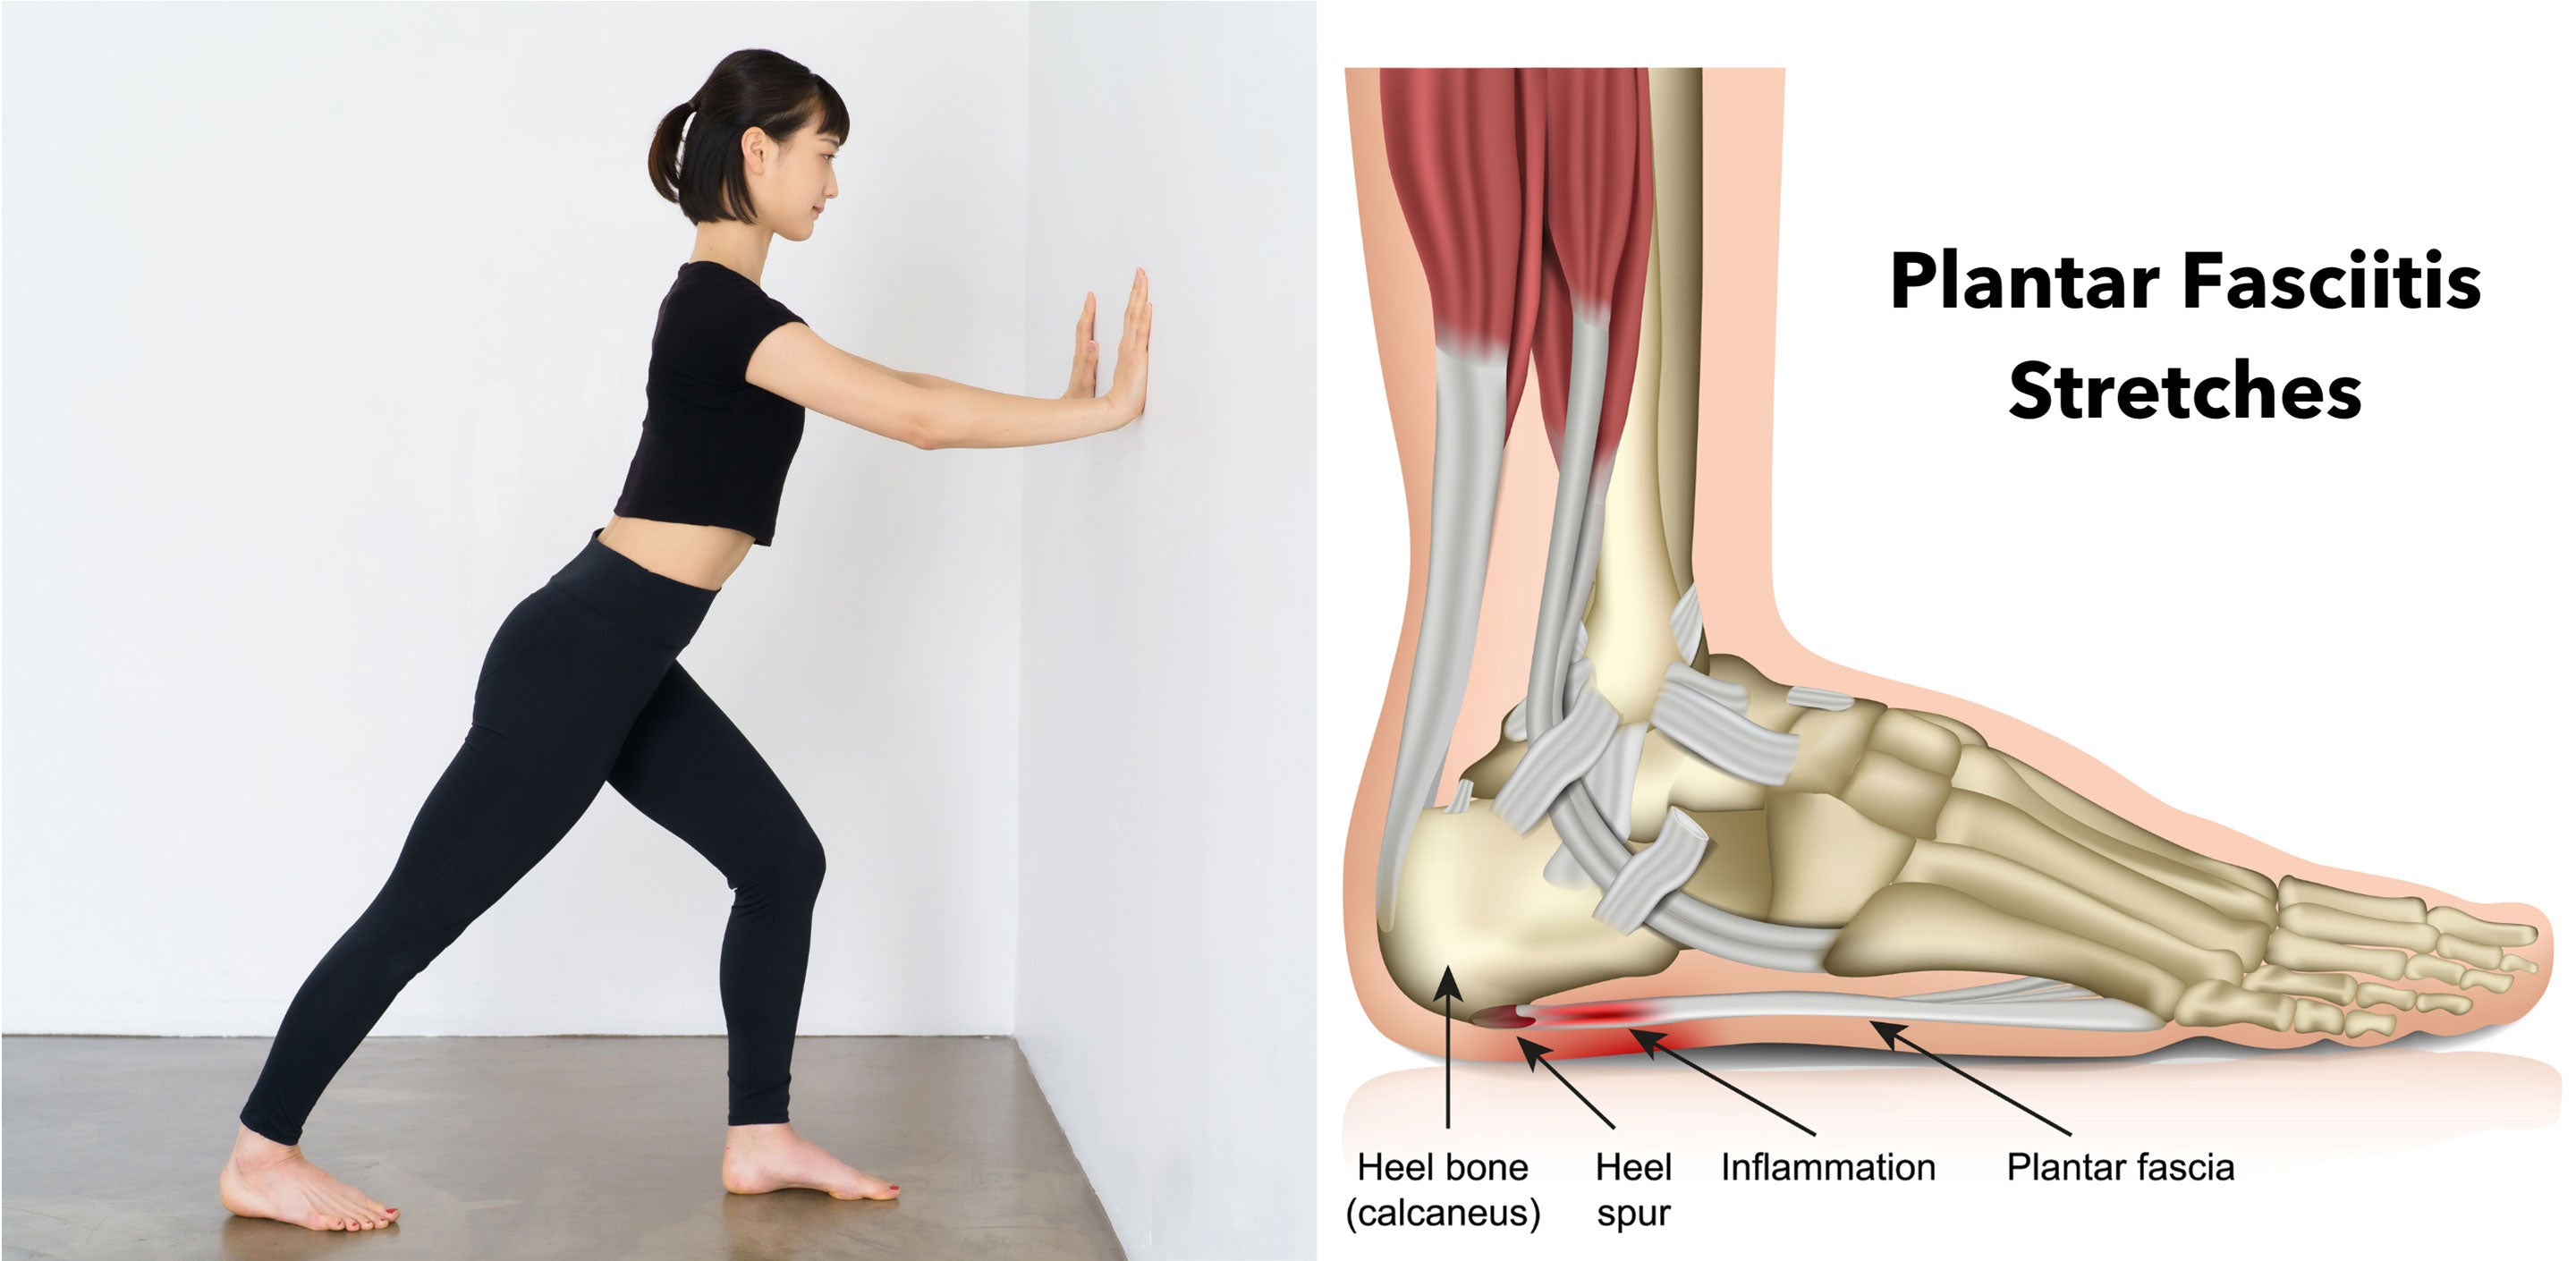 Exercises and Stretches for Plantar Fasciitis